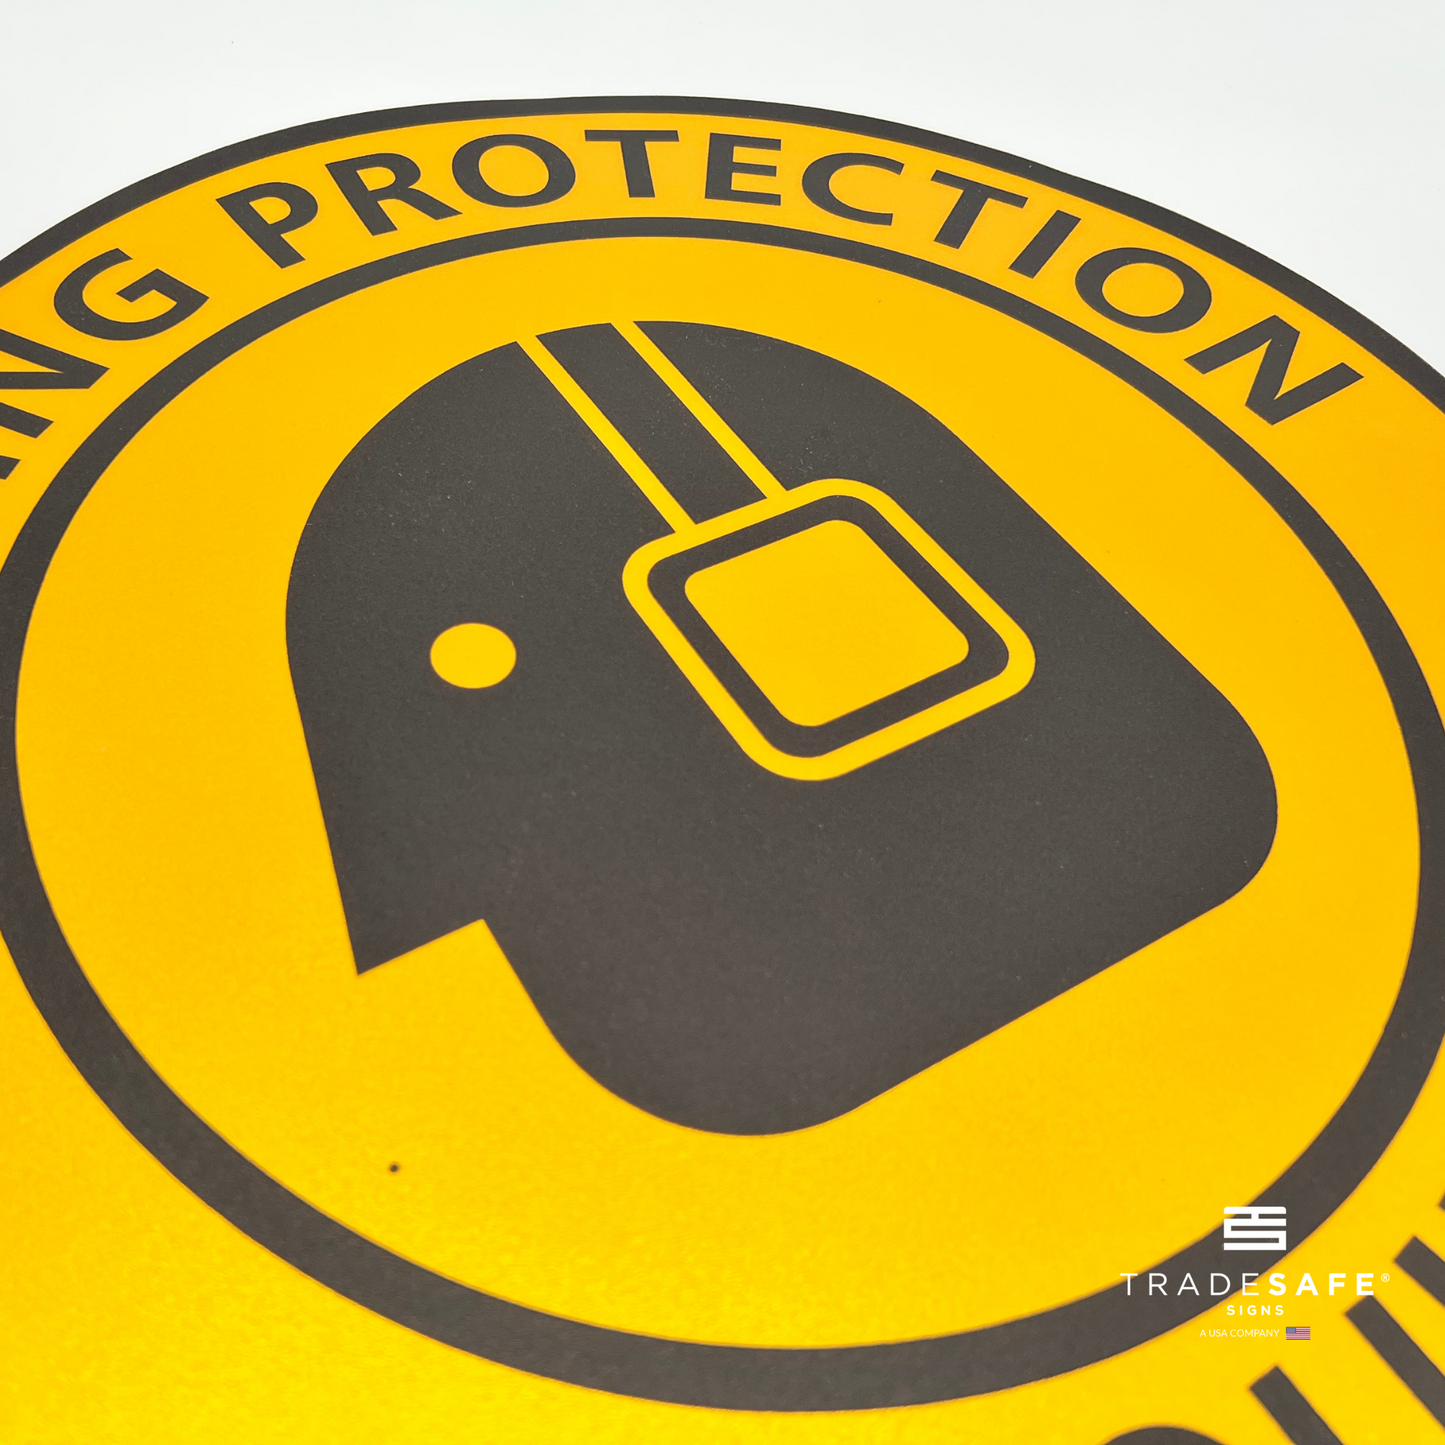 close-up of "hearing protection required" sign